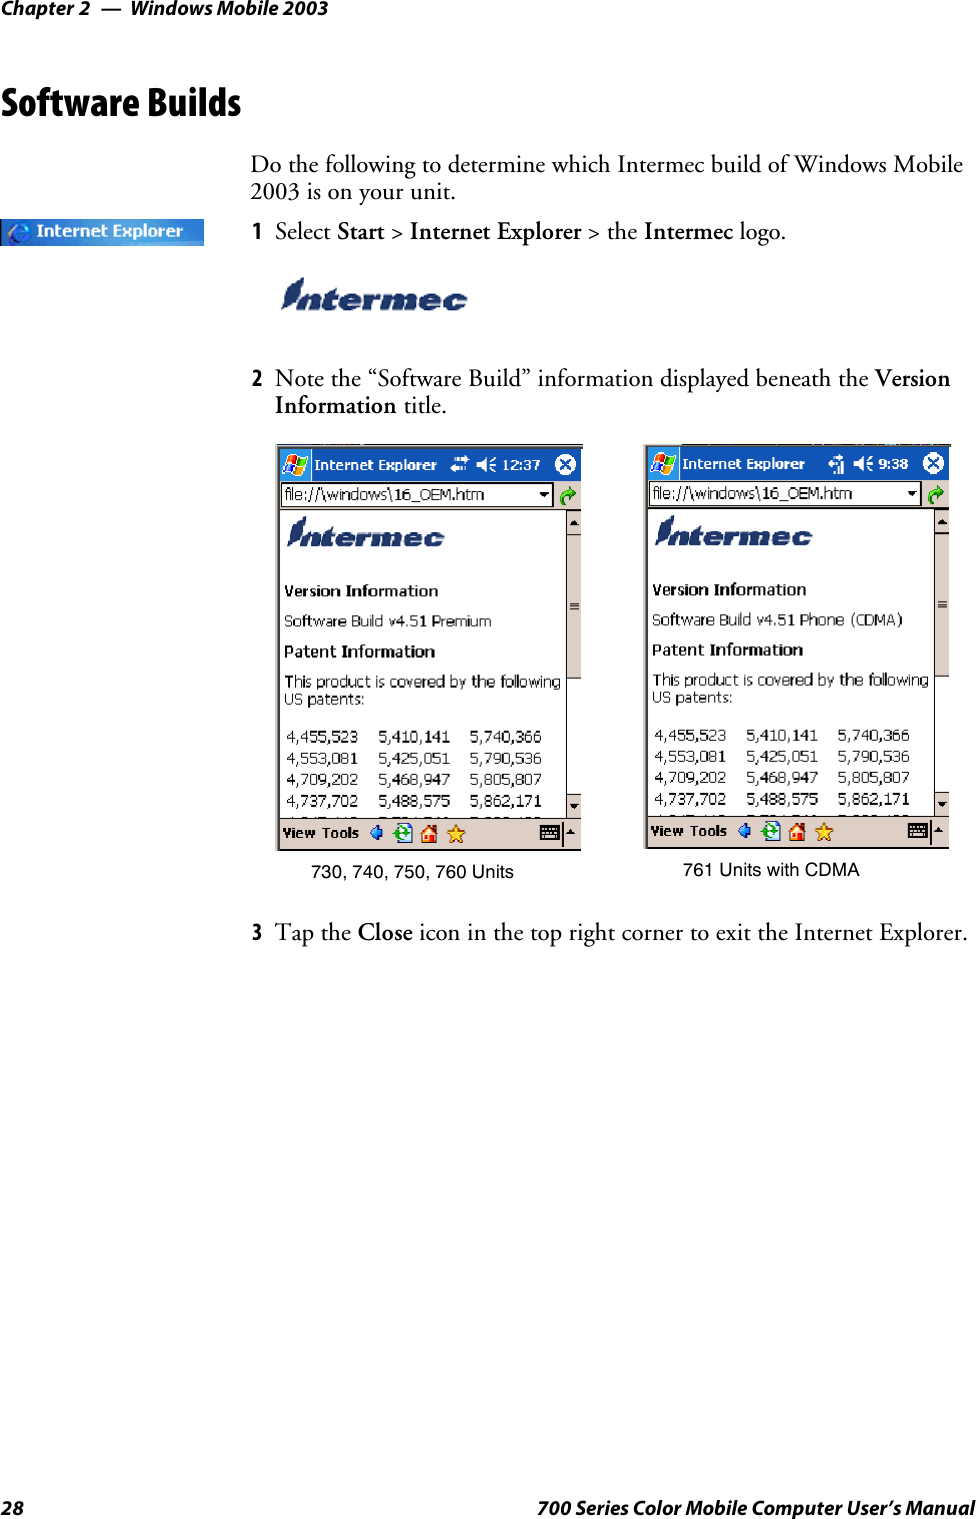 Windows Mobile 2003Chapter —228 700 Series Color Mobile Computer User’s ManualSoftware BuildsDo the following to determine which Intermec build of Windows Mobile2003 is on your unit.1Select Start &gt;Internet Explorer &gt;theIntermec logo.2Note the “Software Build” information displayed beneath the VersionInformation title.730, 740, 750, 760 Units 761 Units with CDMA3Tap the Close icon in the top right corner to exit the Internet Explorer.